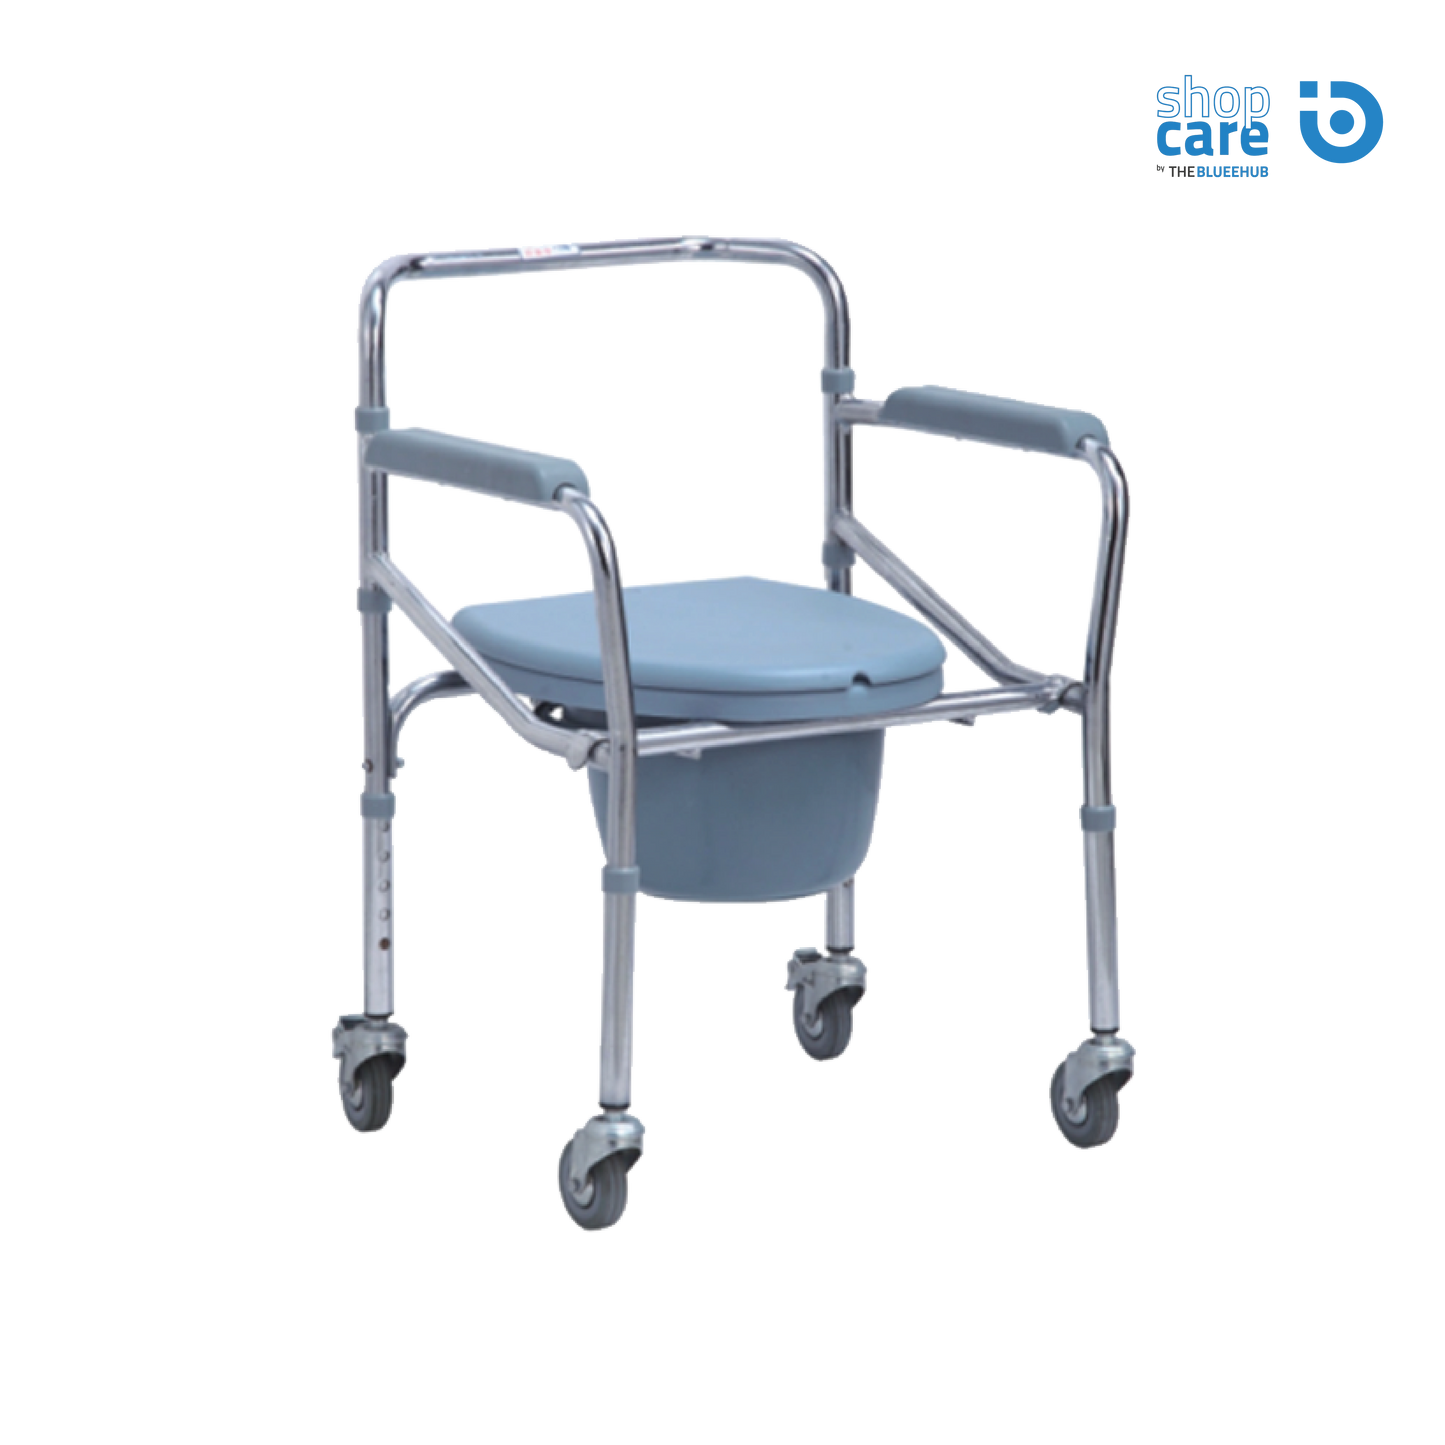 FOLDABLE MOBILE STEEL COMMODE CHAIR